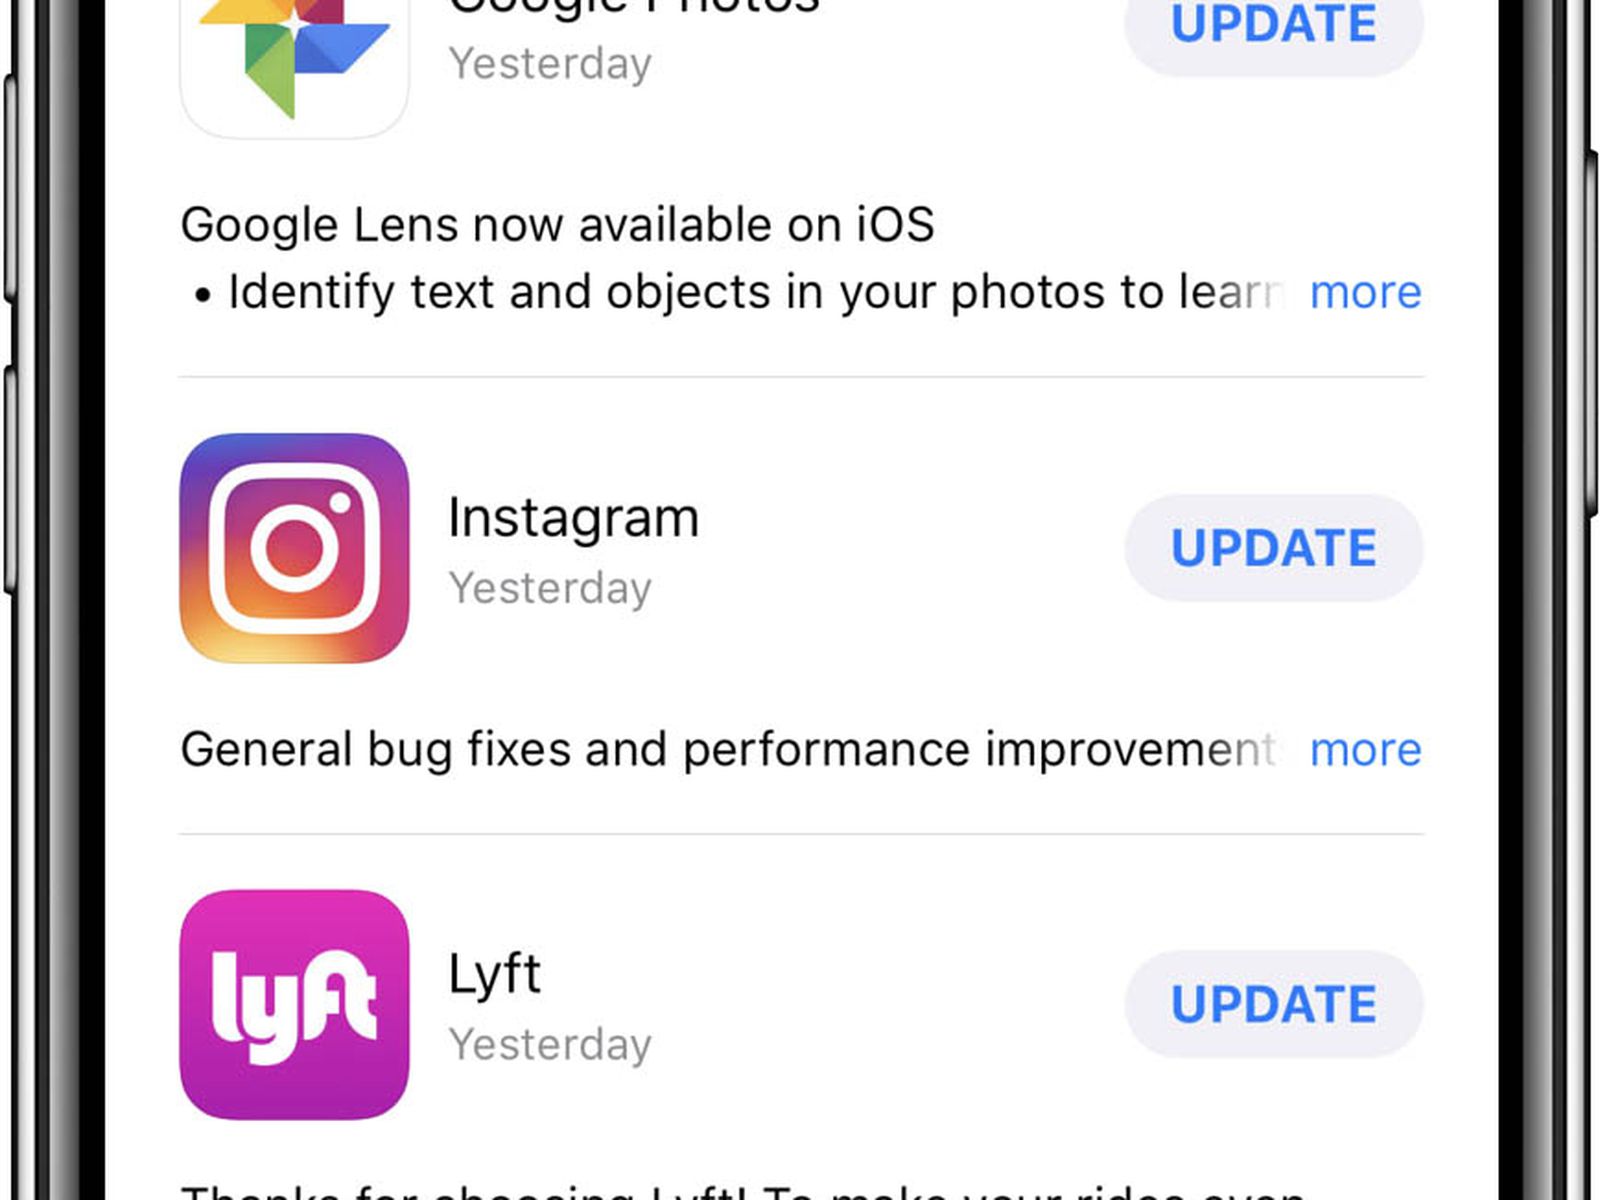 Work with iOS App Updates in Your Account in the App Store